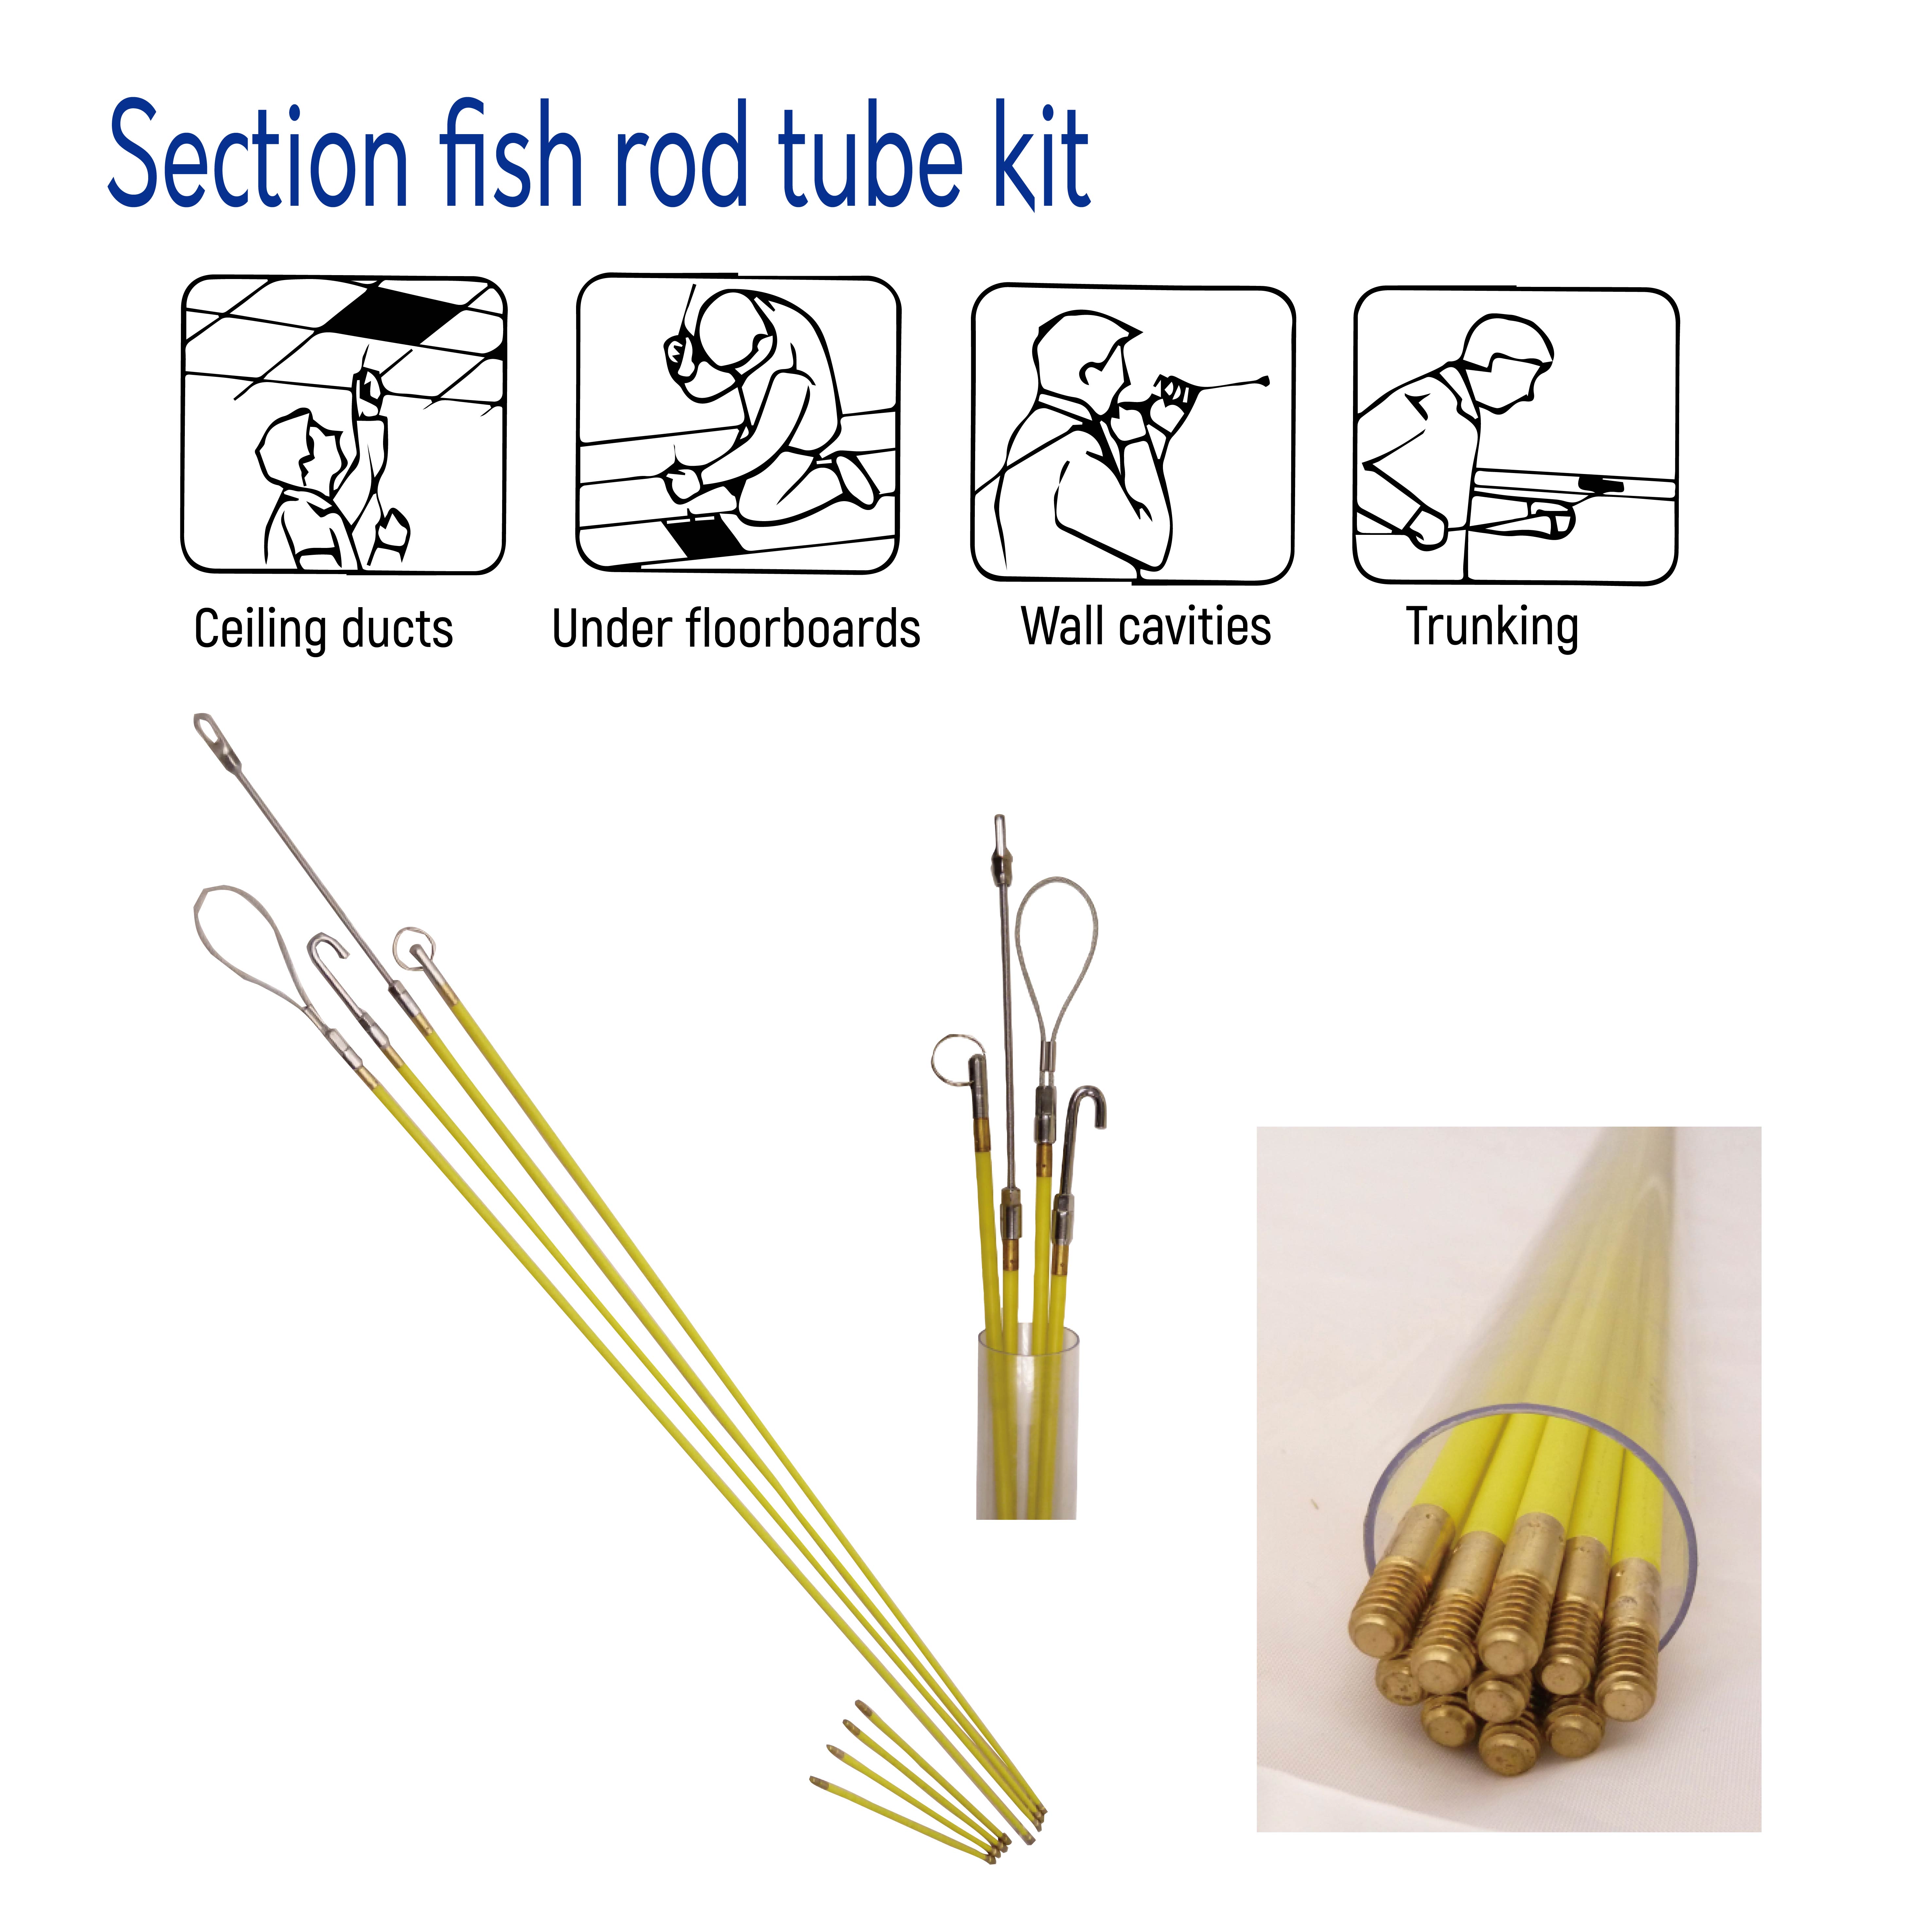 FISH TAPES/ WIRE GUIDERS/ SECTION FISH ROD KIT